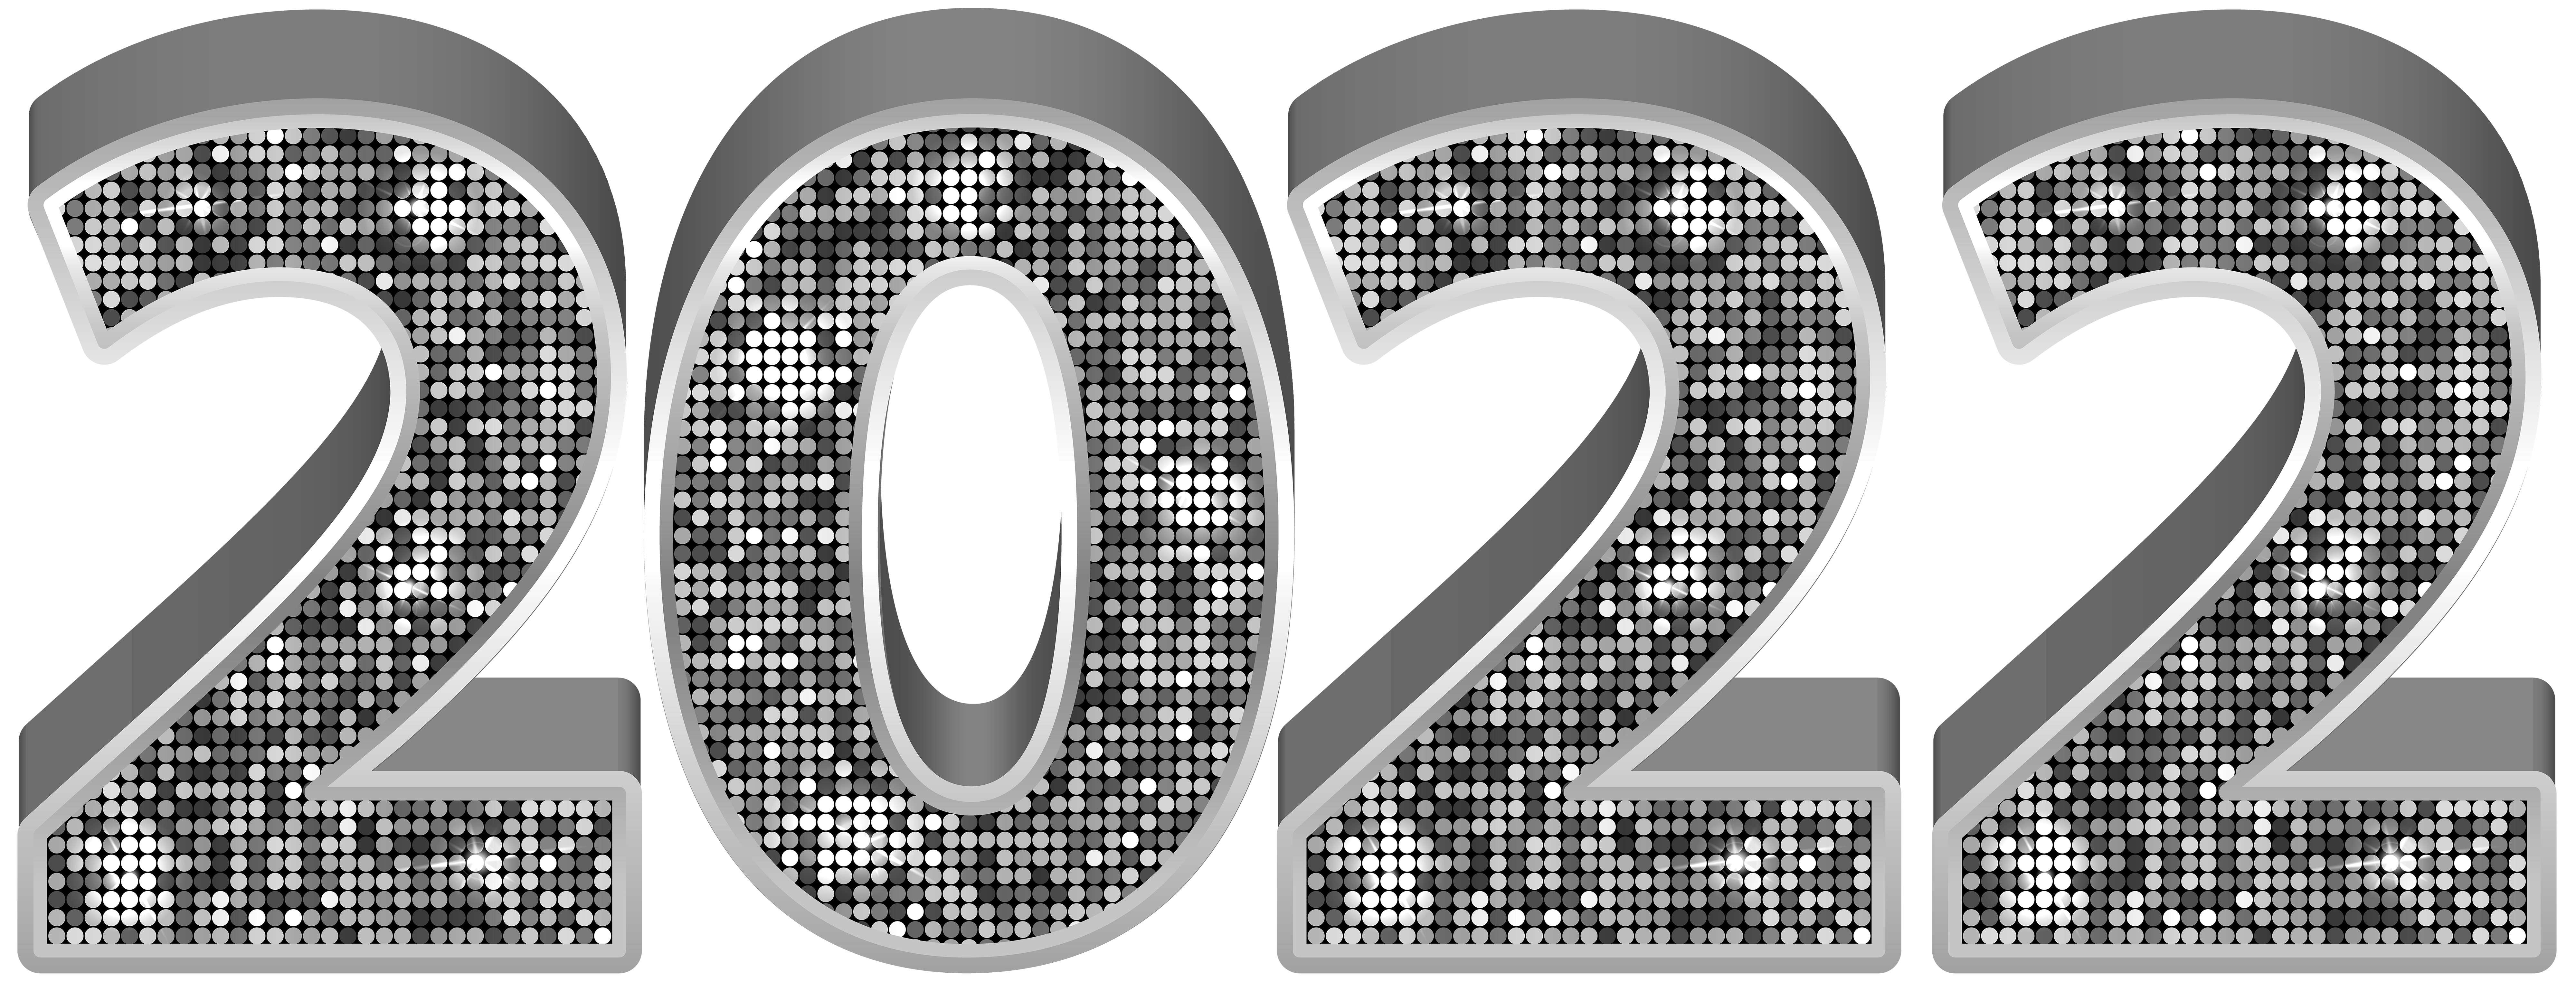 2022 clipart black and white